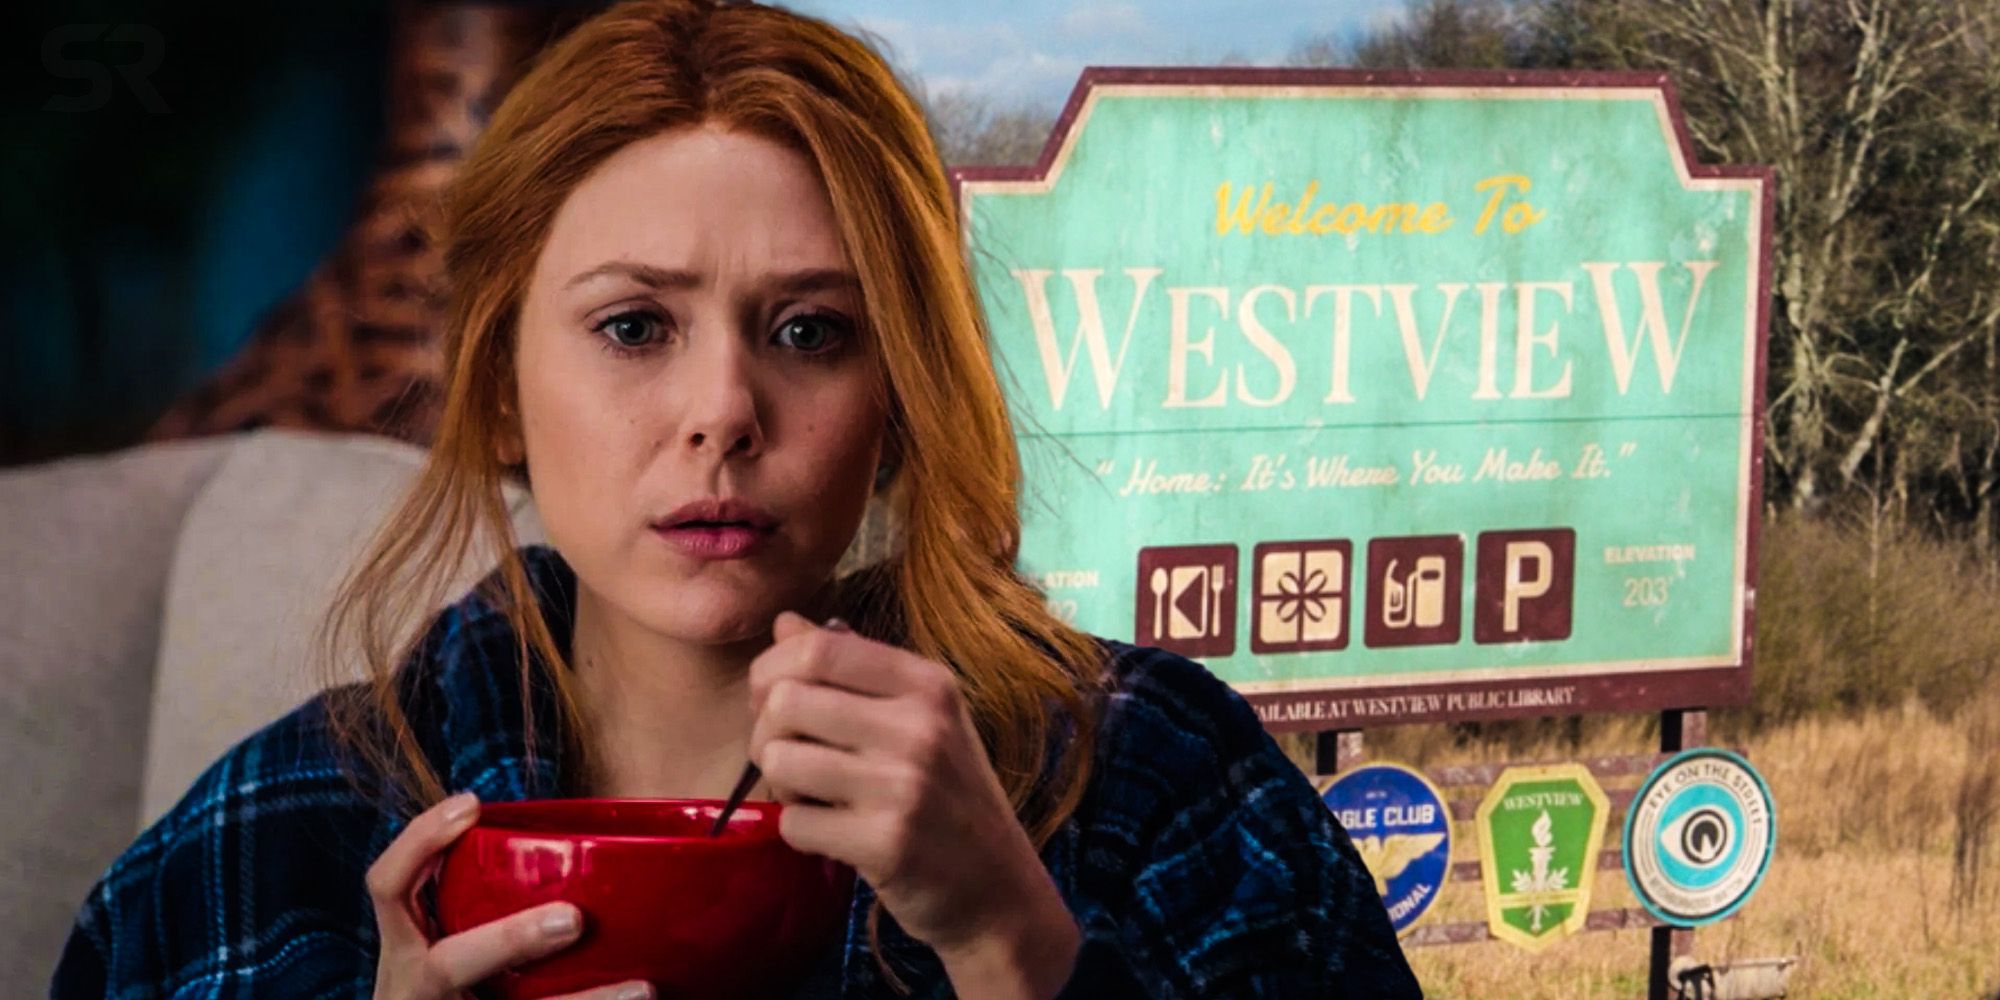 Wanda eating cereal and an image of the Westview sign from Wandavision